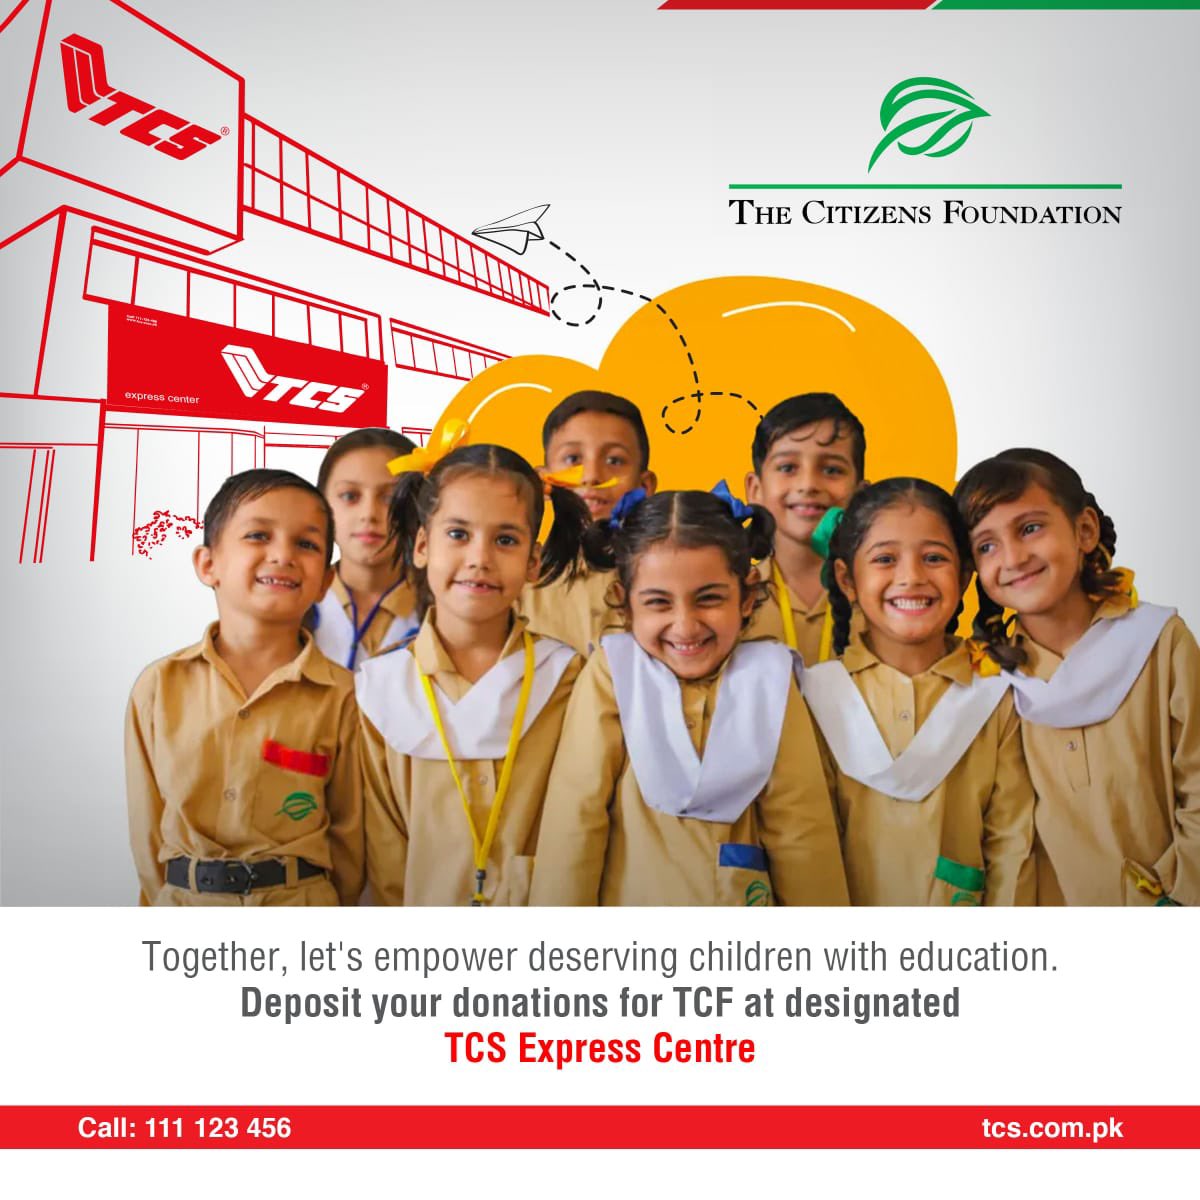 We are thrilled to announce our partnership with The Citizens Foundation (TCF)
Join us in this noble cause by depositing your donations for TCF at any TCS Express Centre today.
#TCS #TCF #TheCitizensFoundation #EducationForAll #EmpoweringChildren #PartnersInEducation #Change